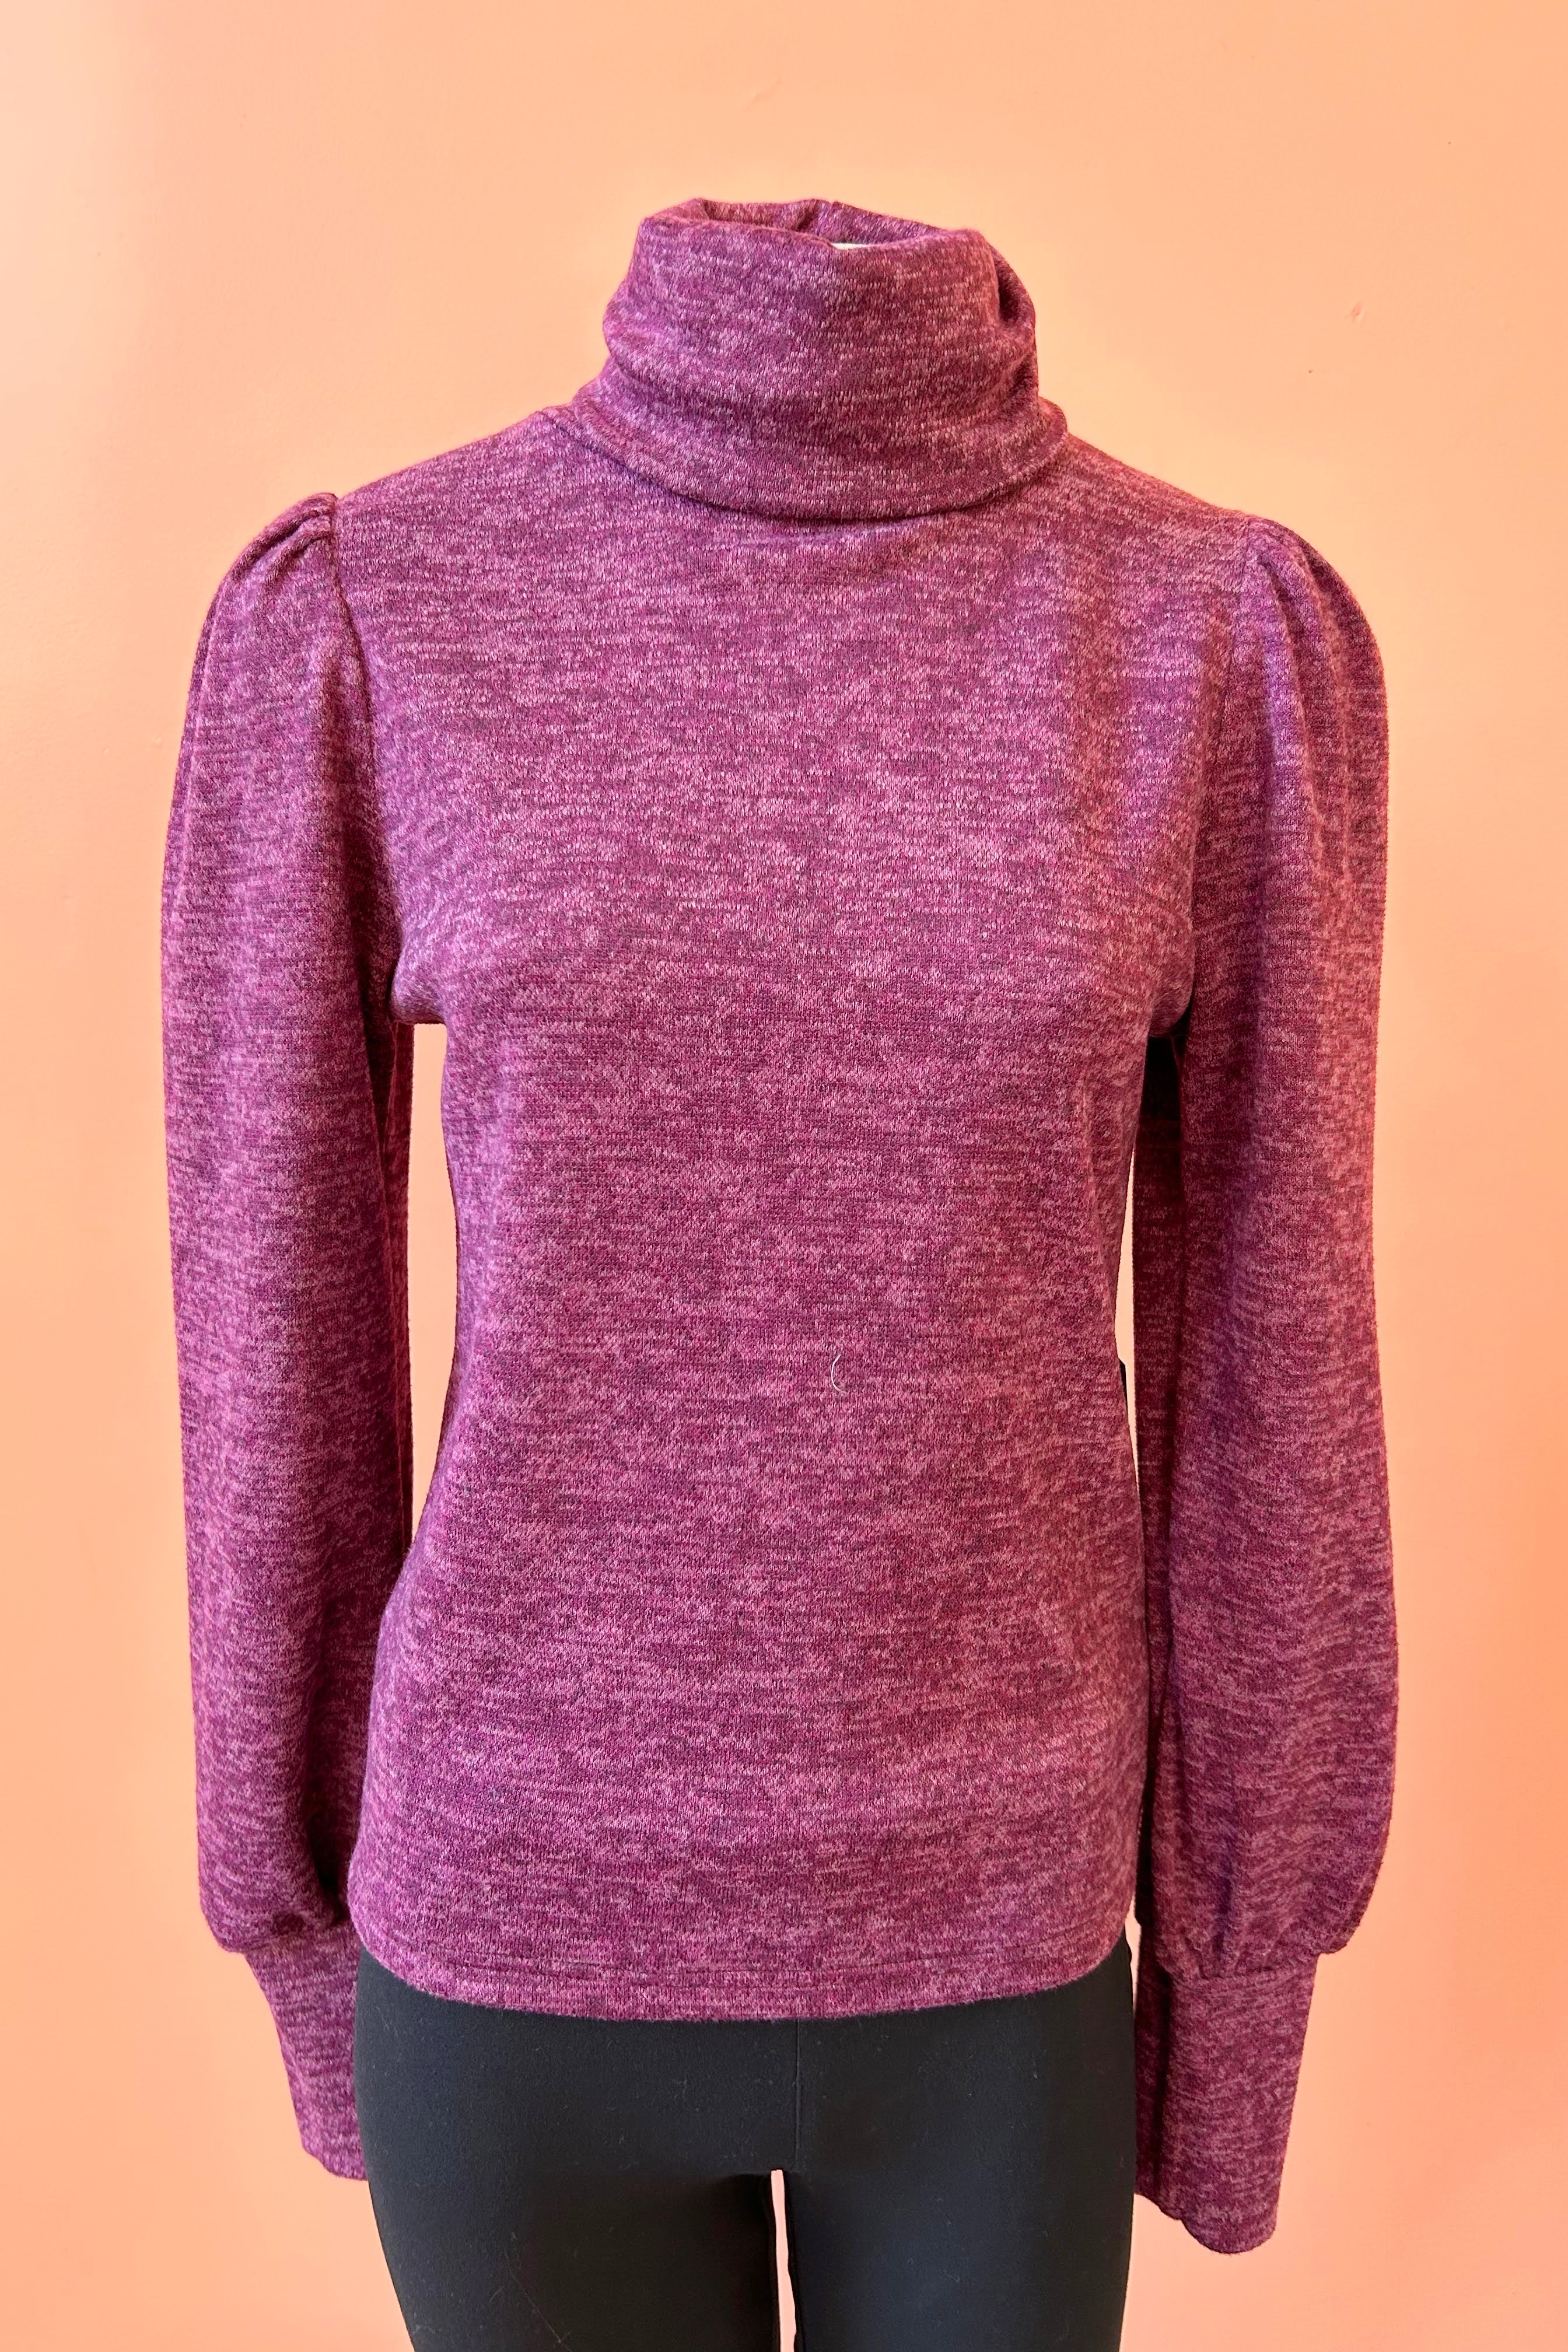 Turtleneck Top by Misstery, Wine, high neck, puffed sleeves with gathered cuffs, sizes S to XL, made in Toronto 